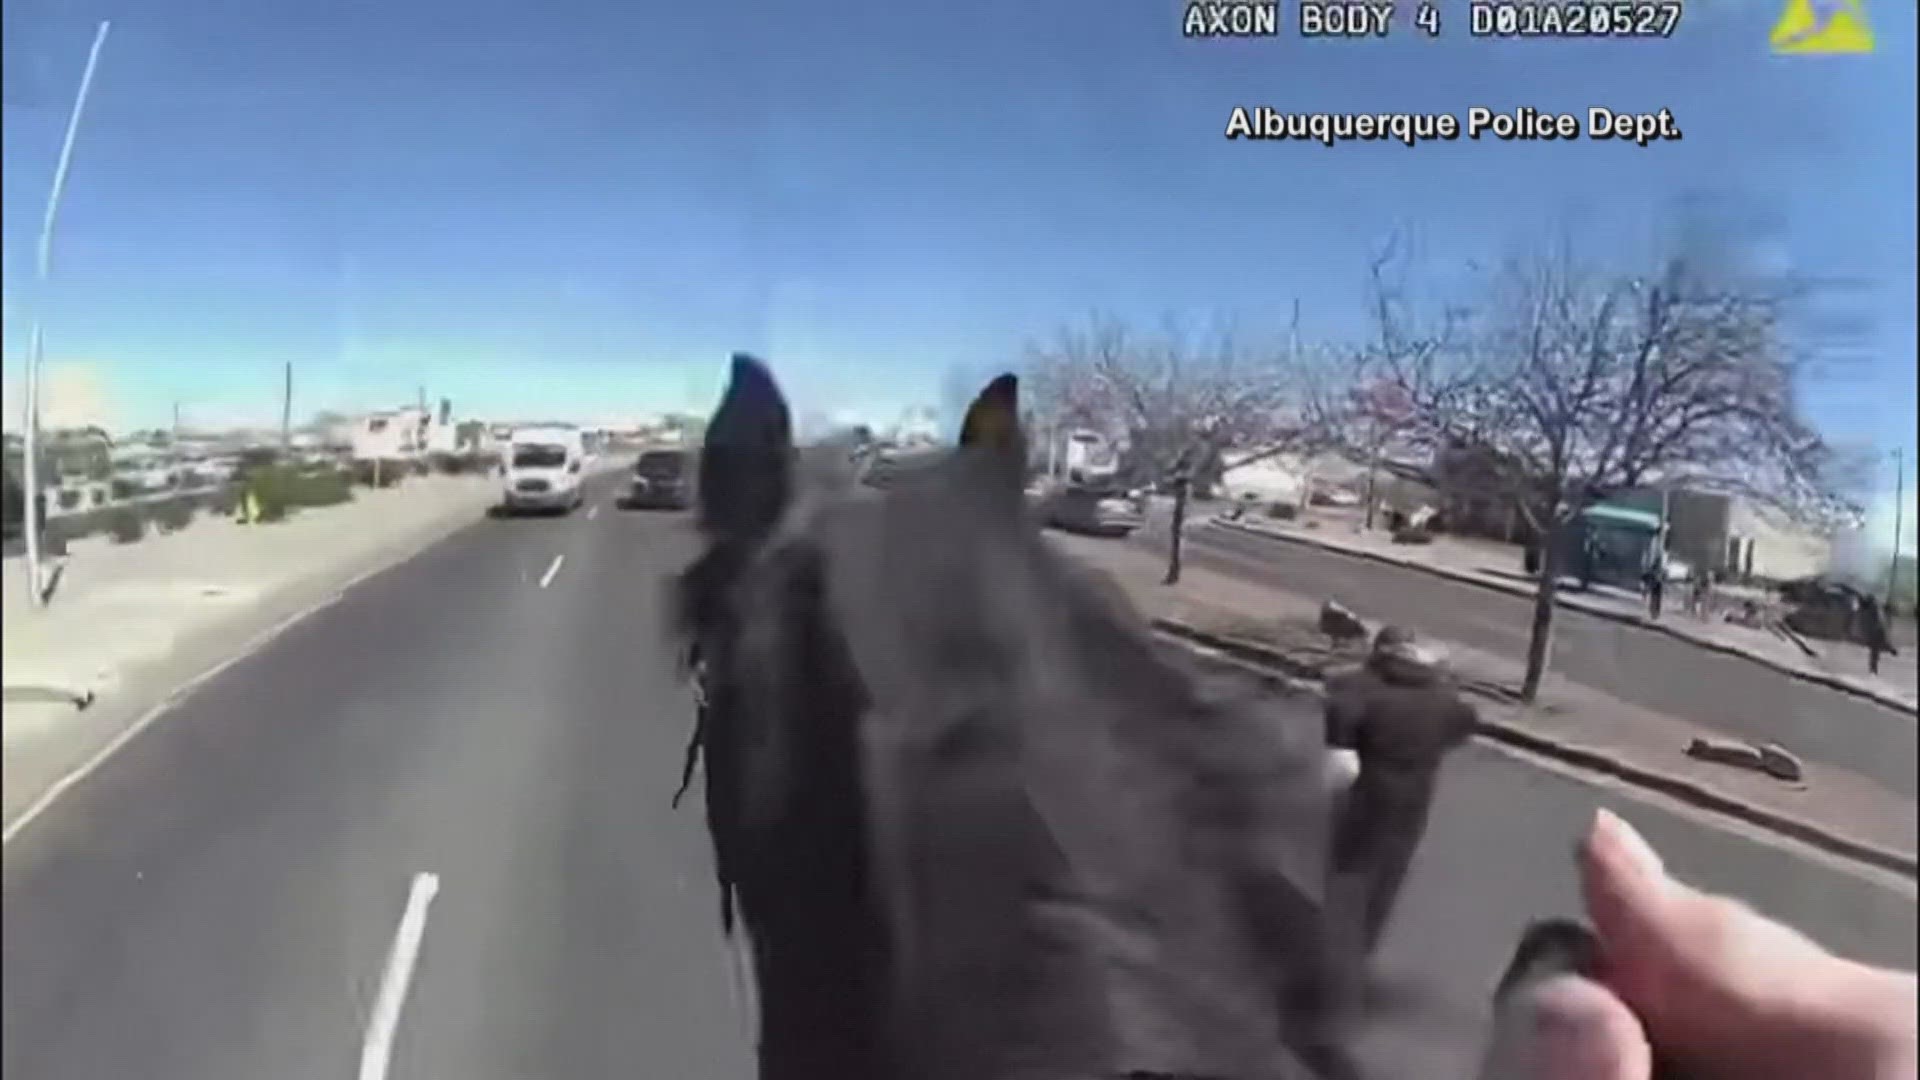 Bodycam footage showed the officer galloping into action after the suspect allegedly tried to flee from a pharmacy.